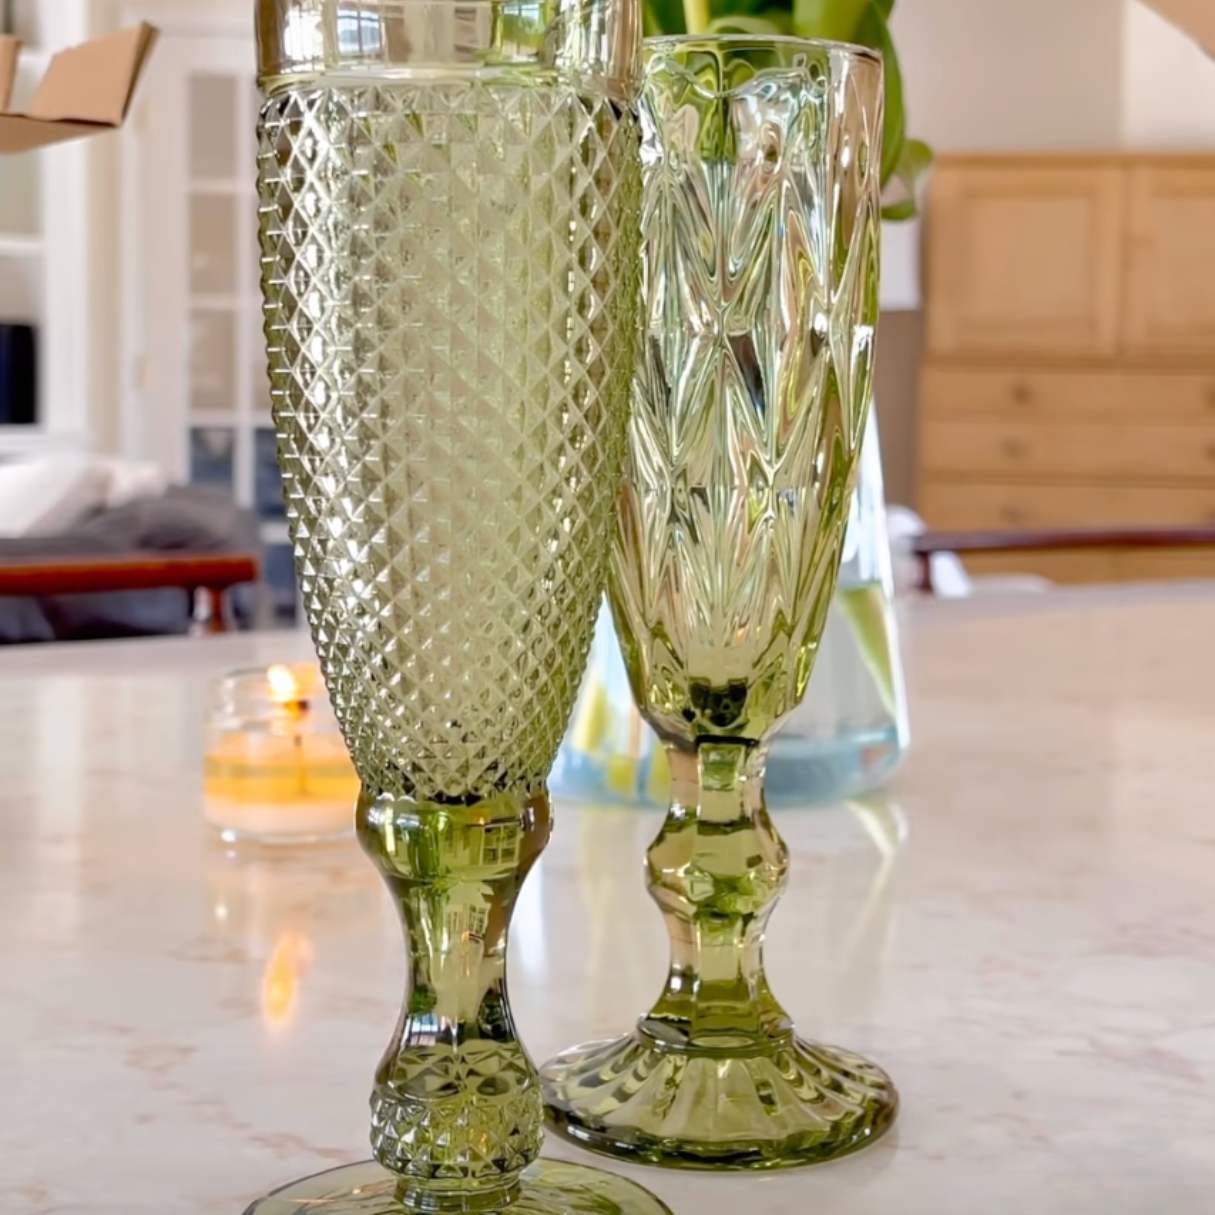 Why Are Champagne Flutes Tall?